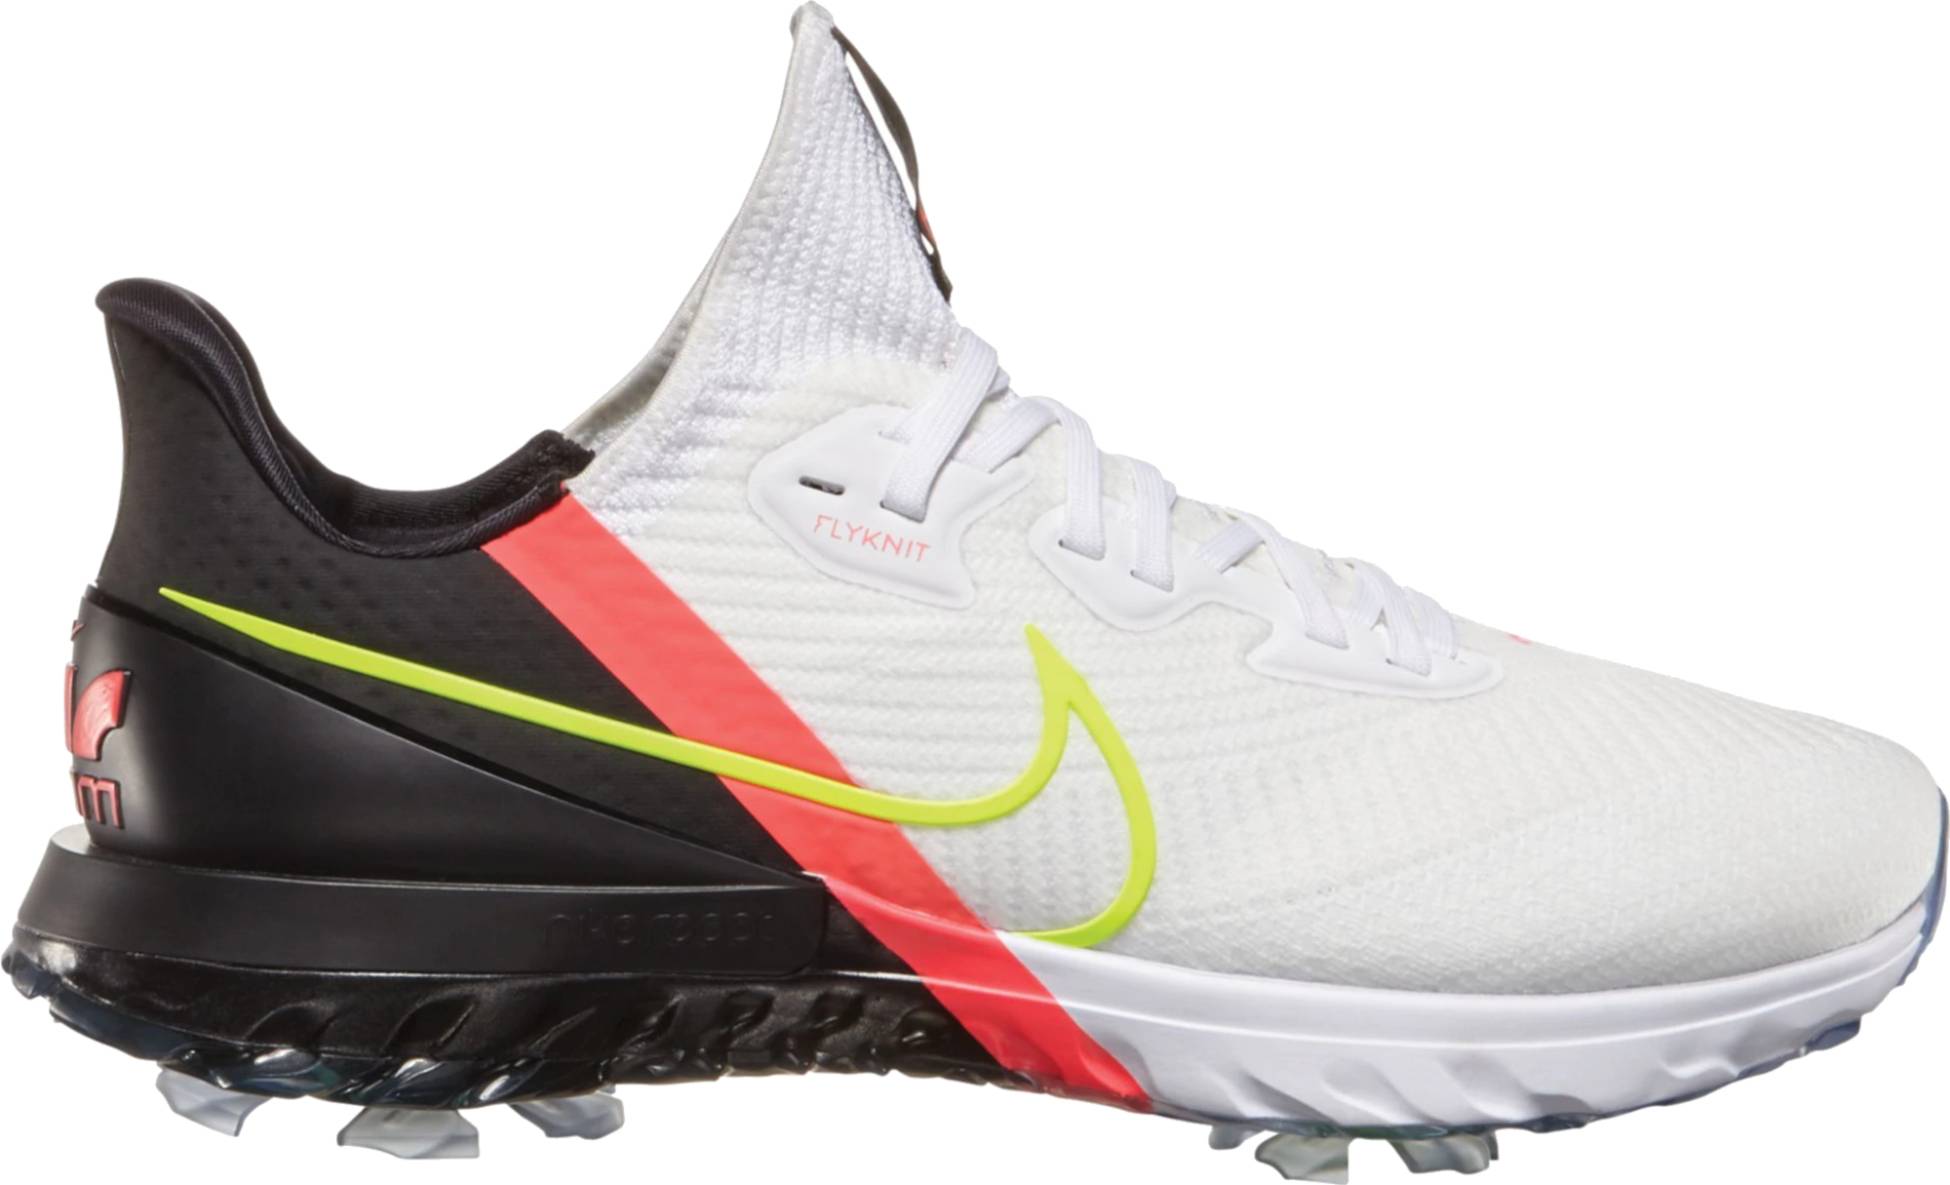 20+ Nike golf shoes: Save up to 50% | RunRepeat